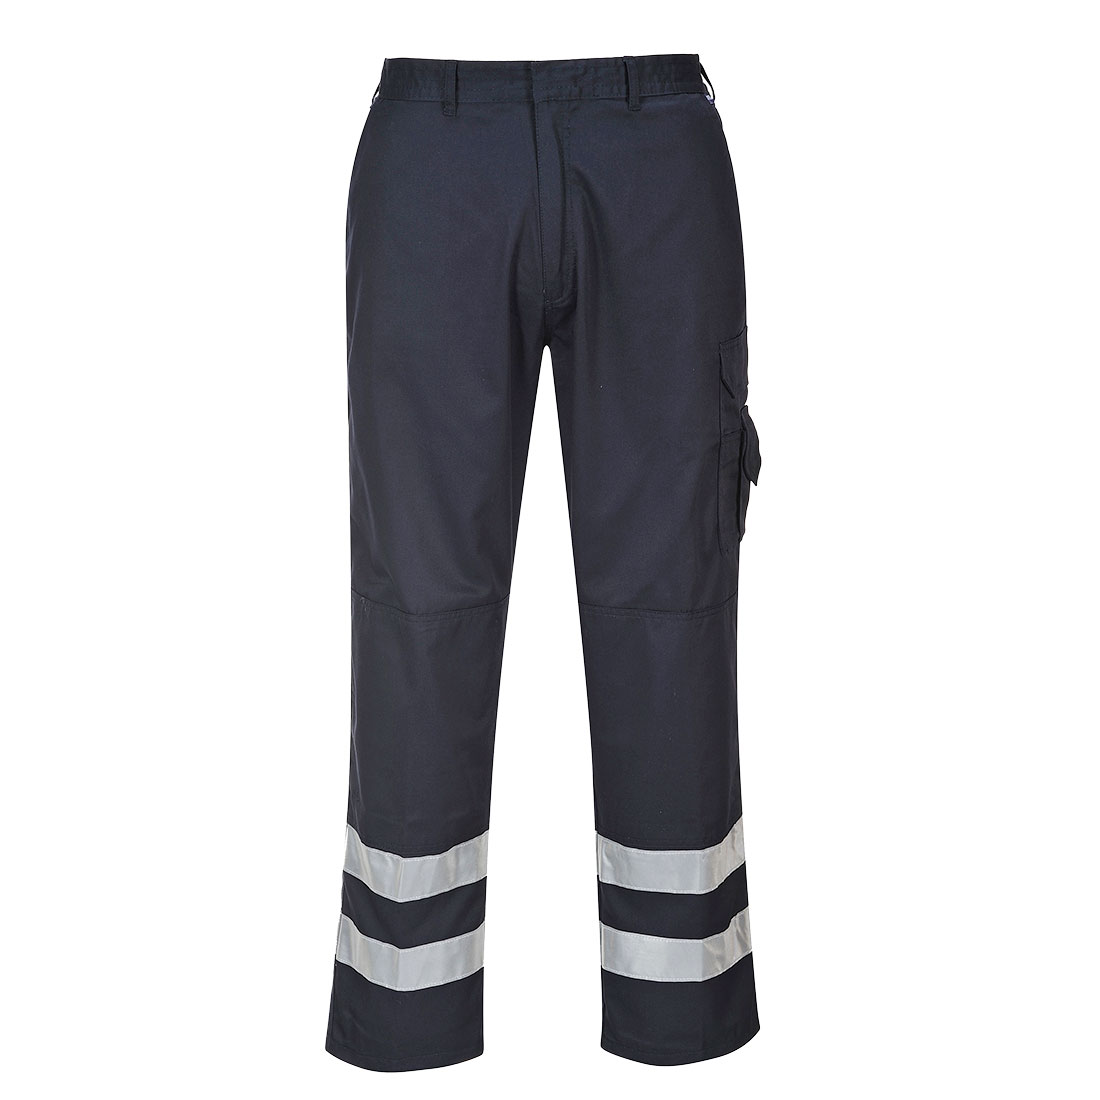 Iona Safety Combat Trouser - Navy